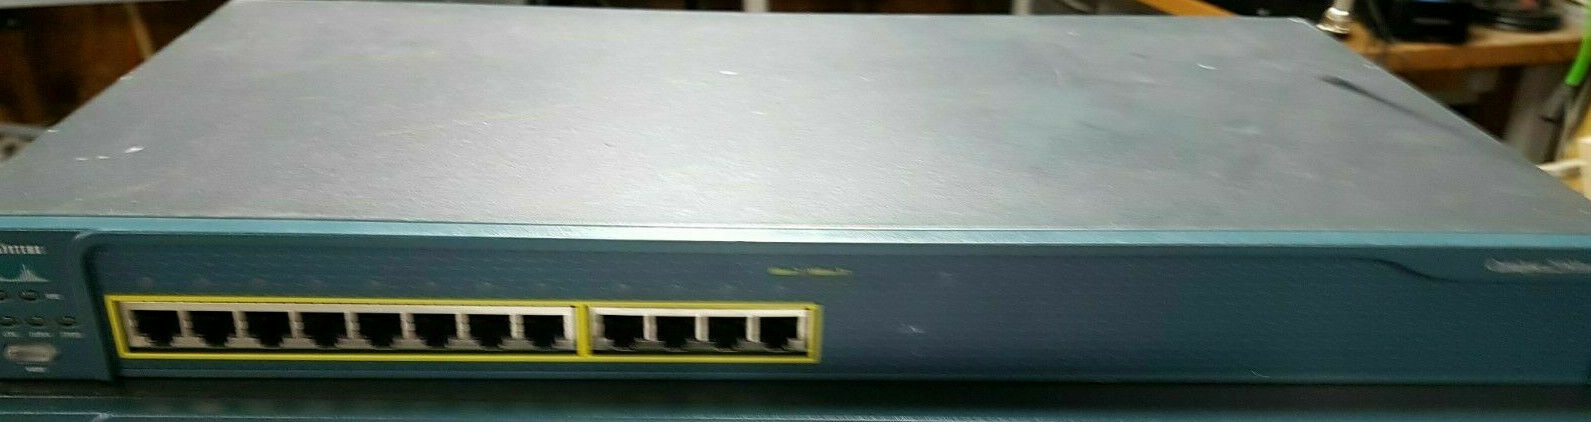 Cisco Catalyst 2950, WS-2950-12 12-Port Ethernet Router Switch SAME/NEXT DAY SH